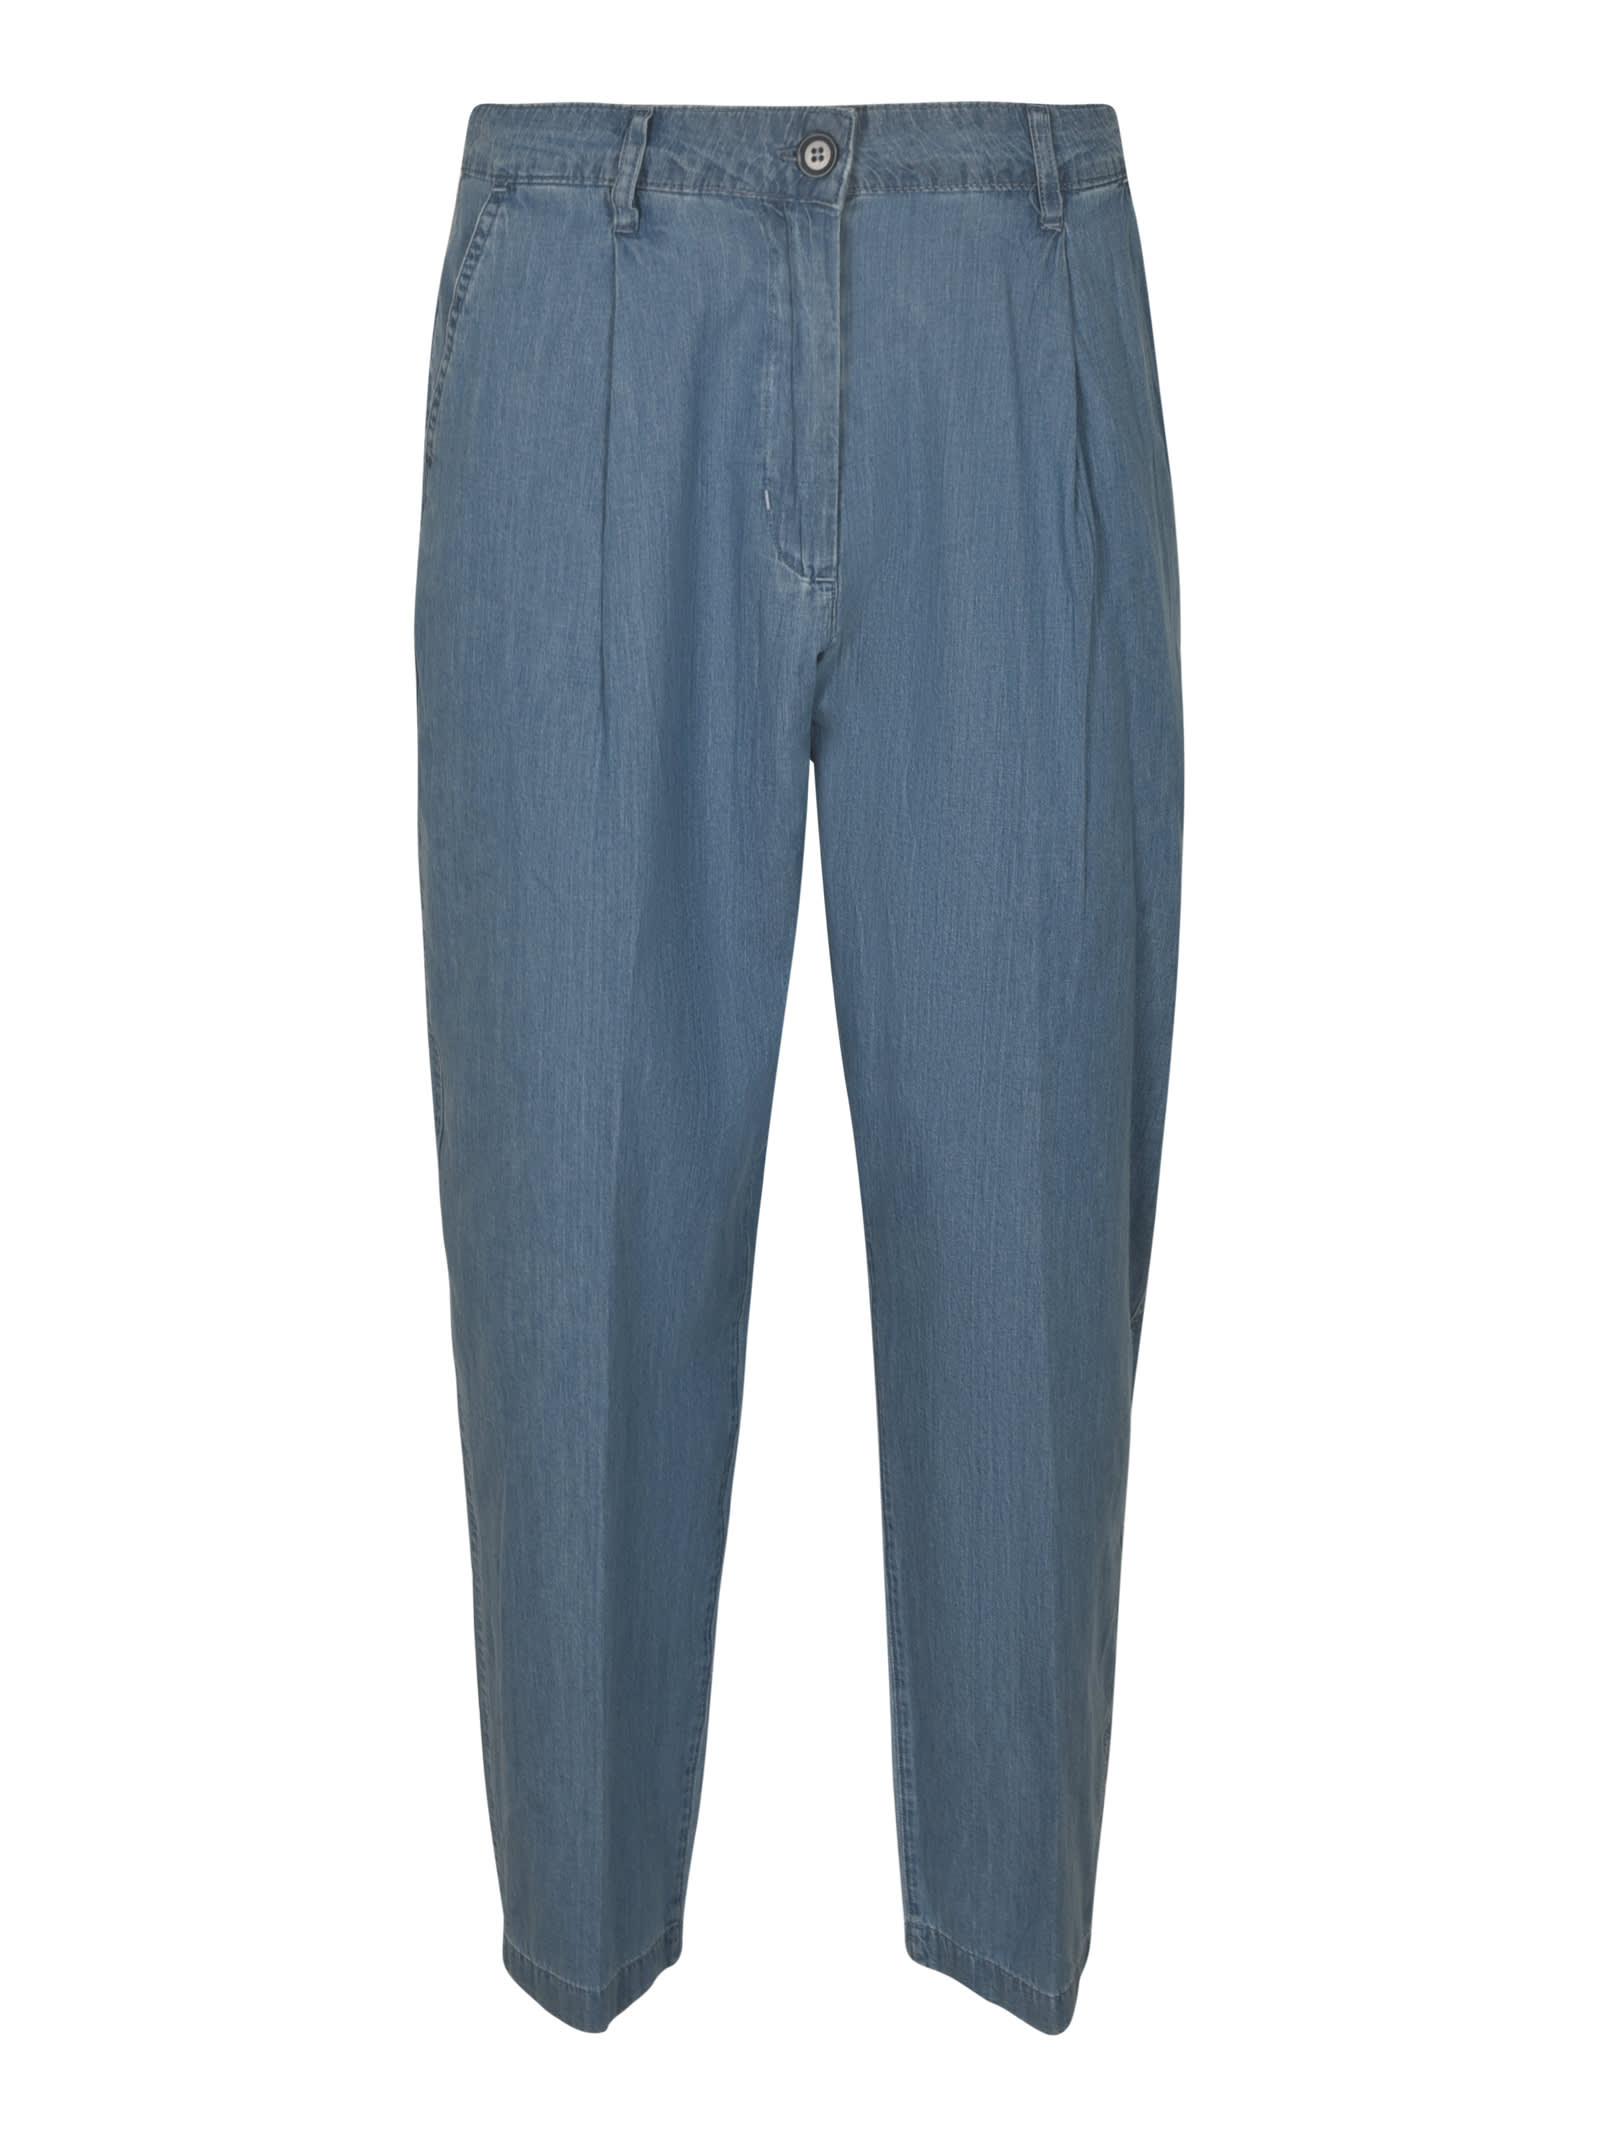 Buttoned Denim Trousers